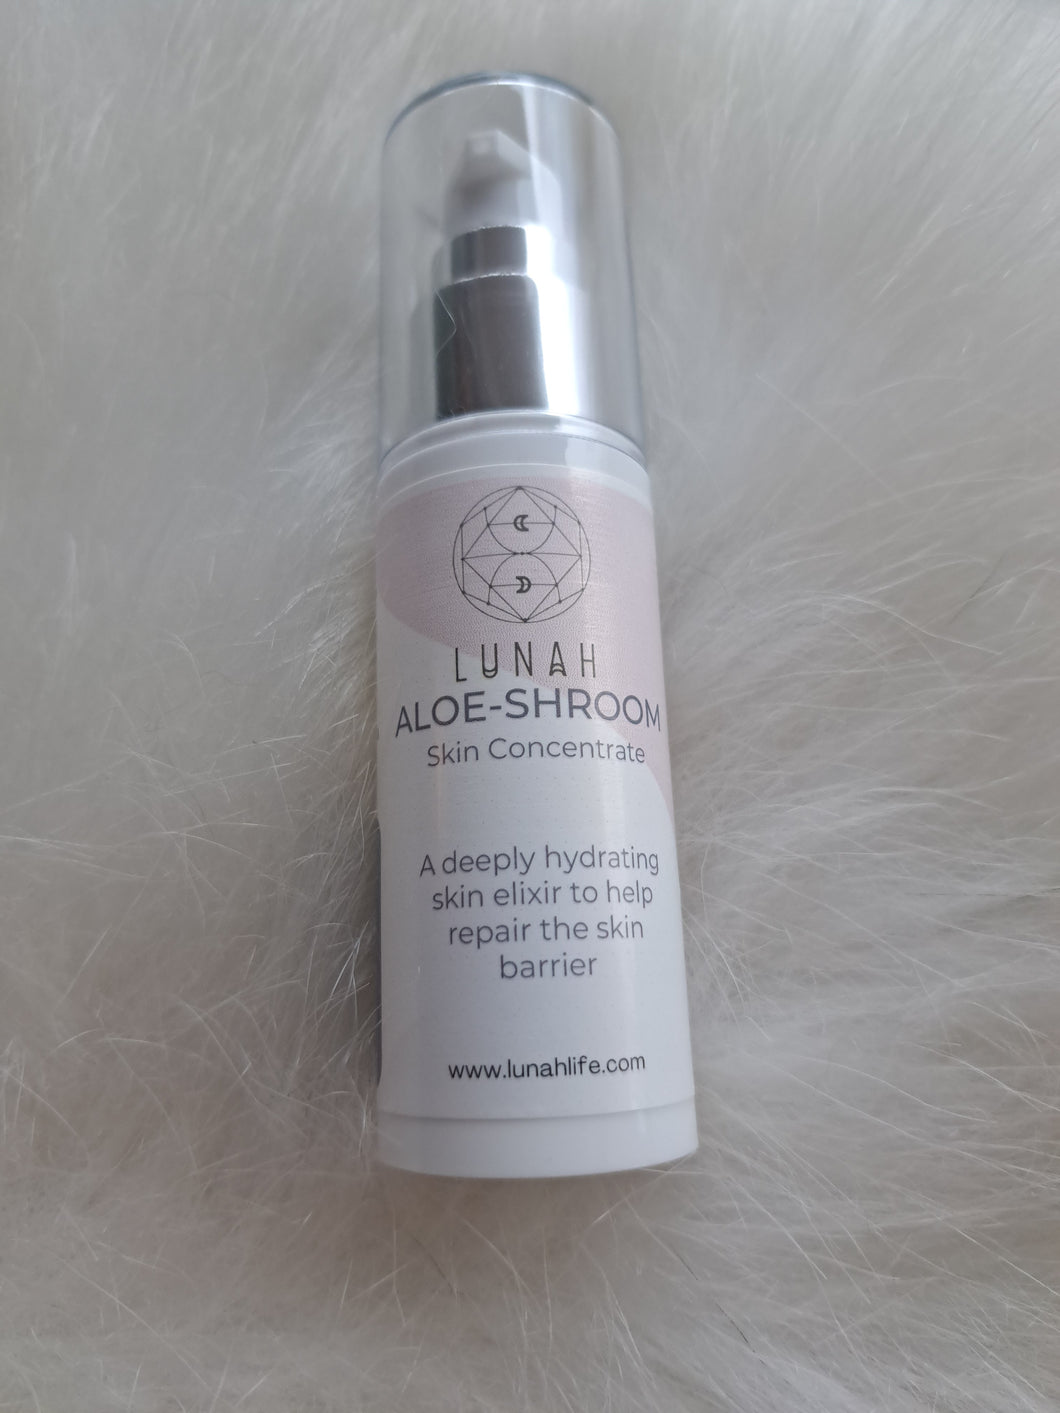 Hydration + Anti-aging: Aloe Schroom Hydrating Skin Concentrate